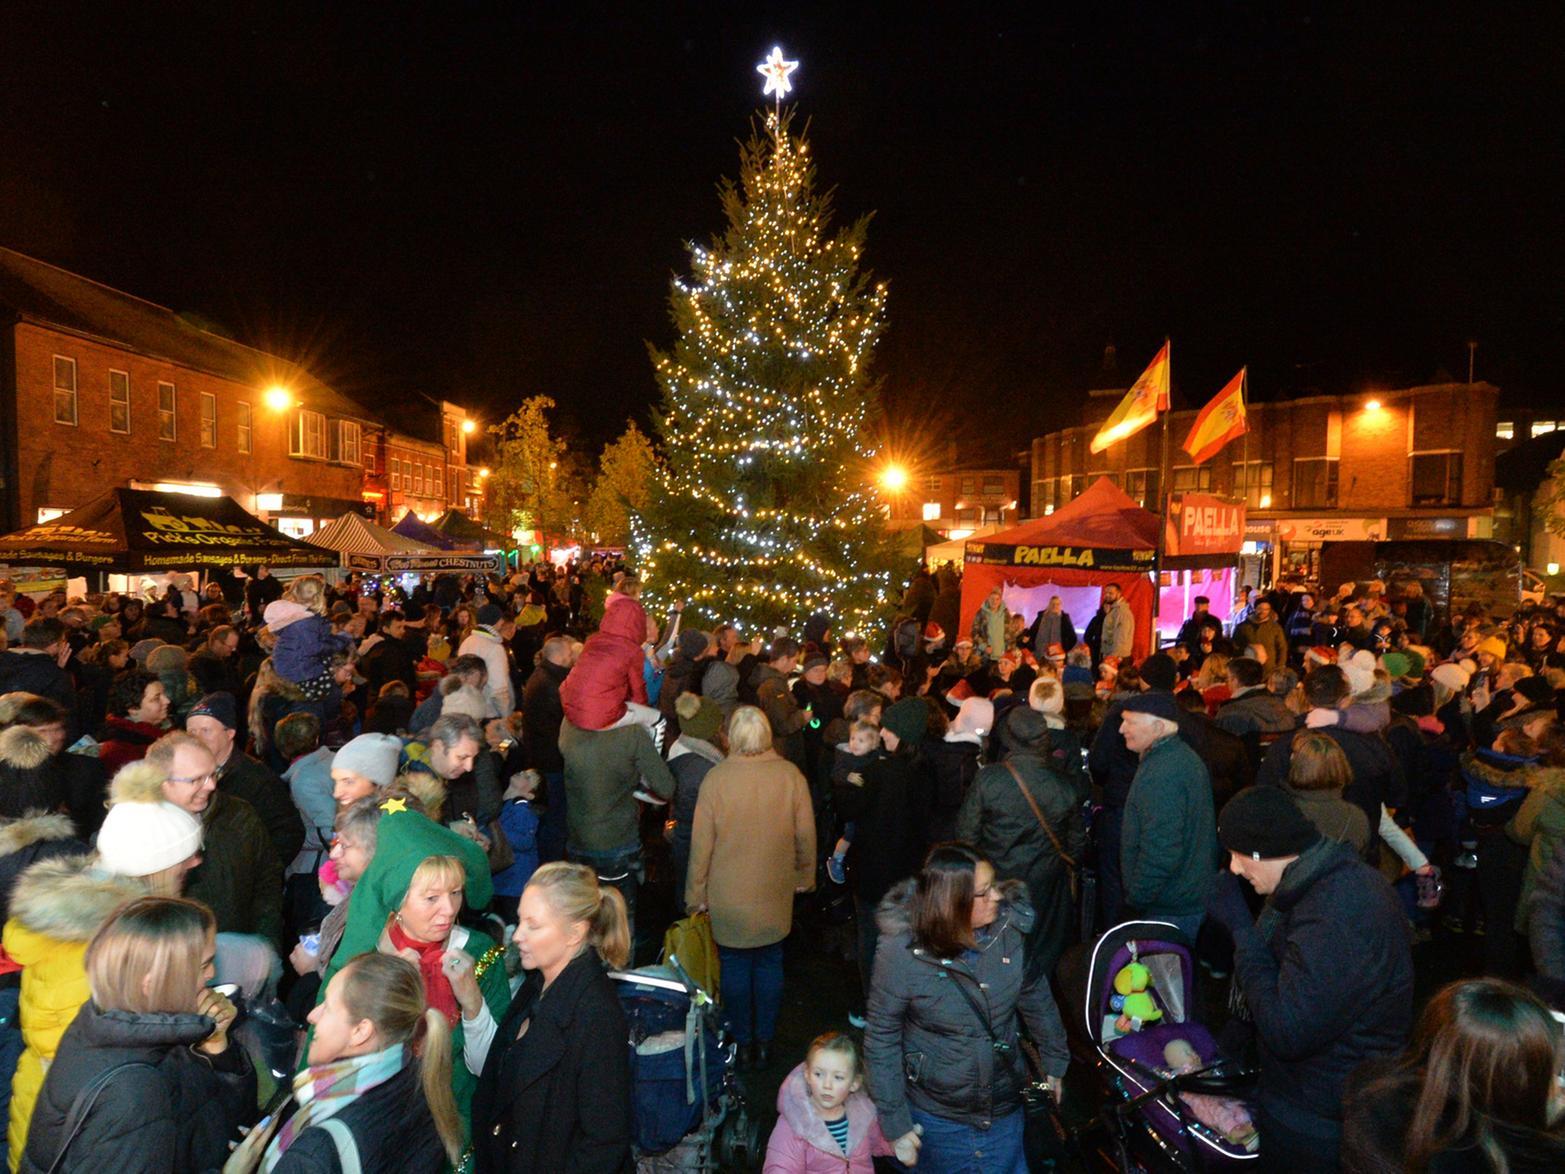 Busy scenes on the Square during the Christmas Tree lights switch on.